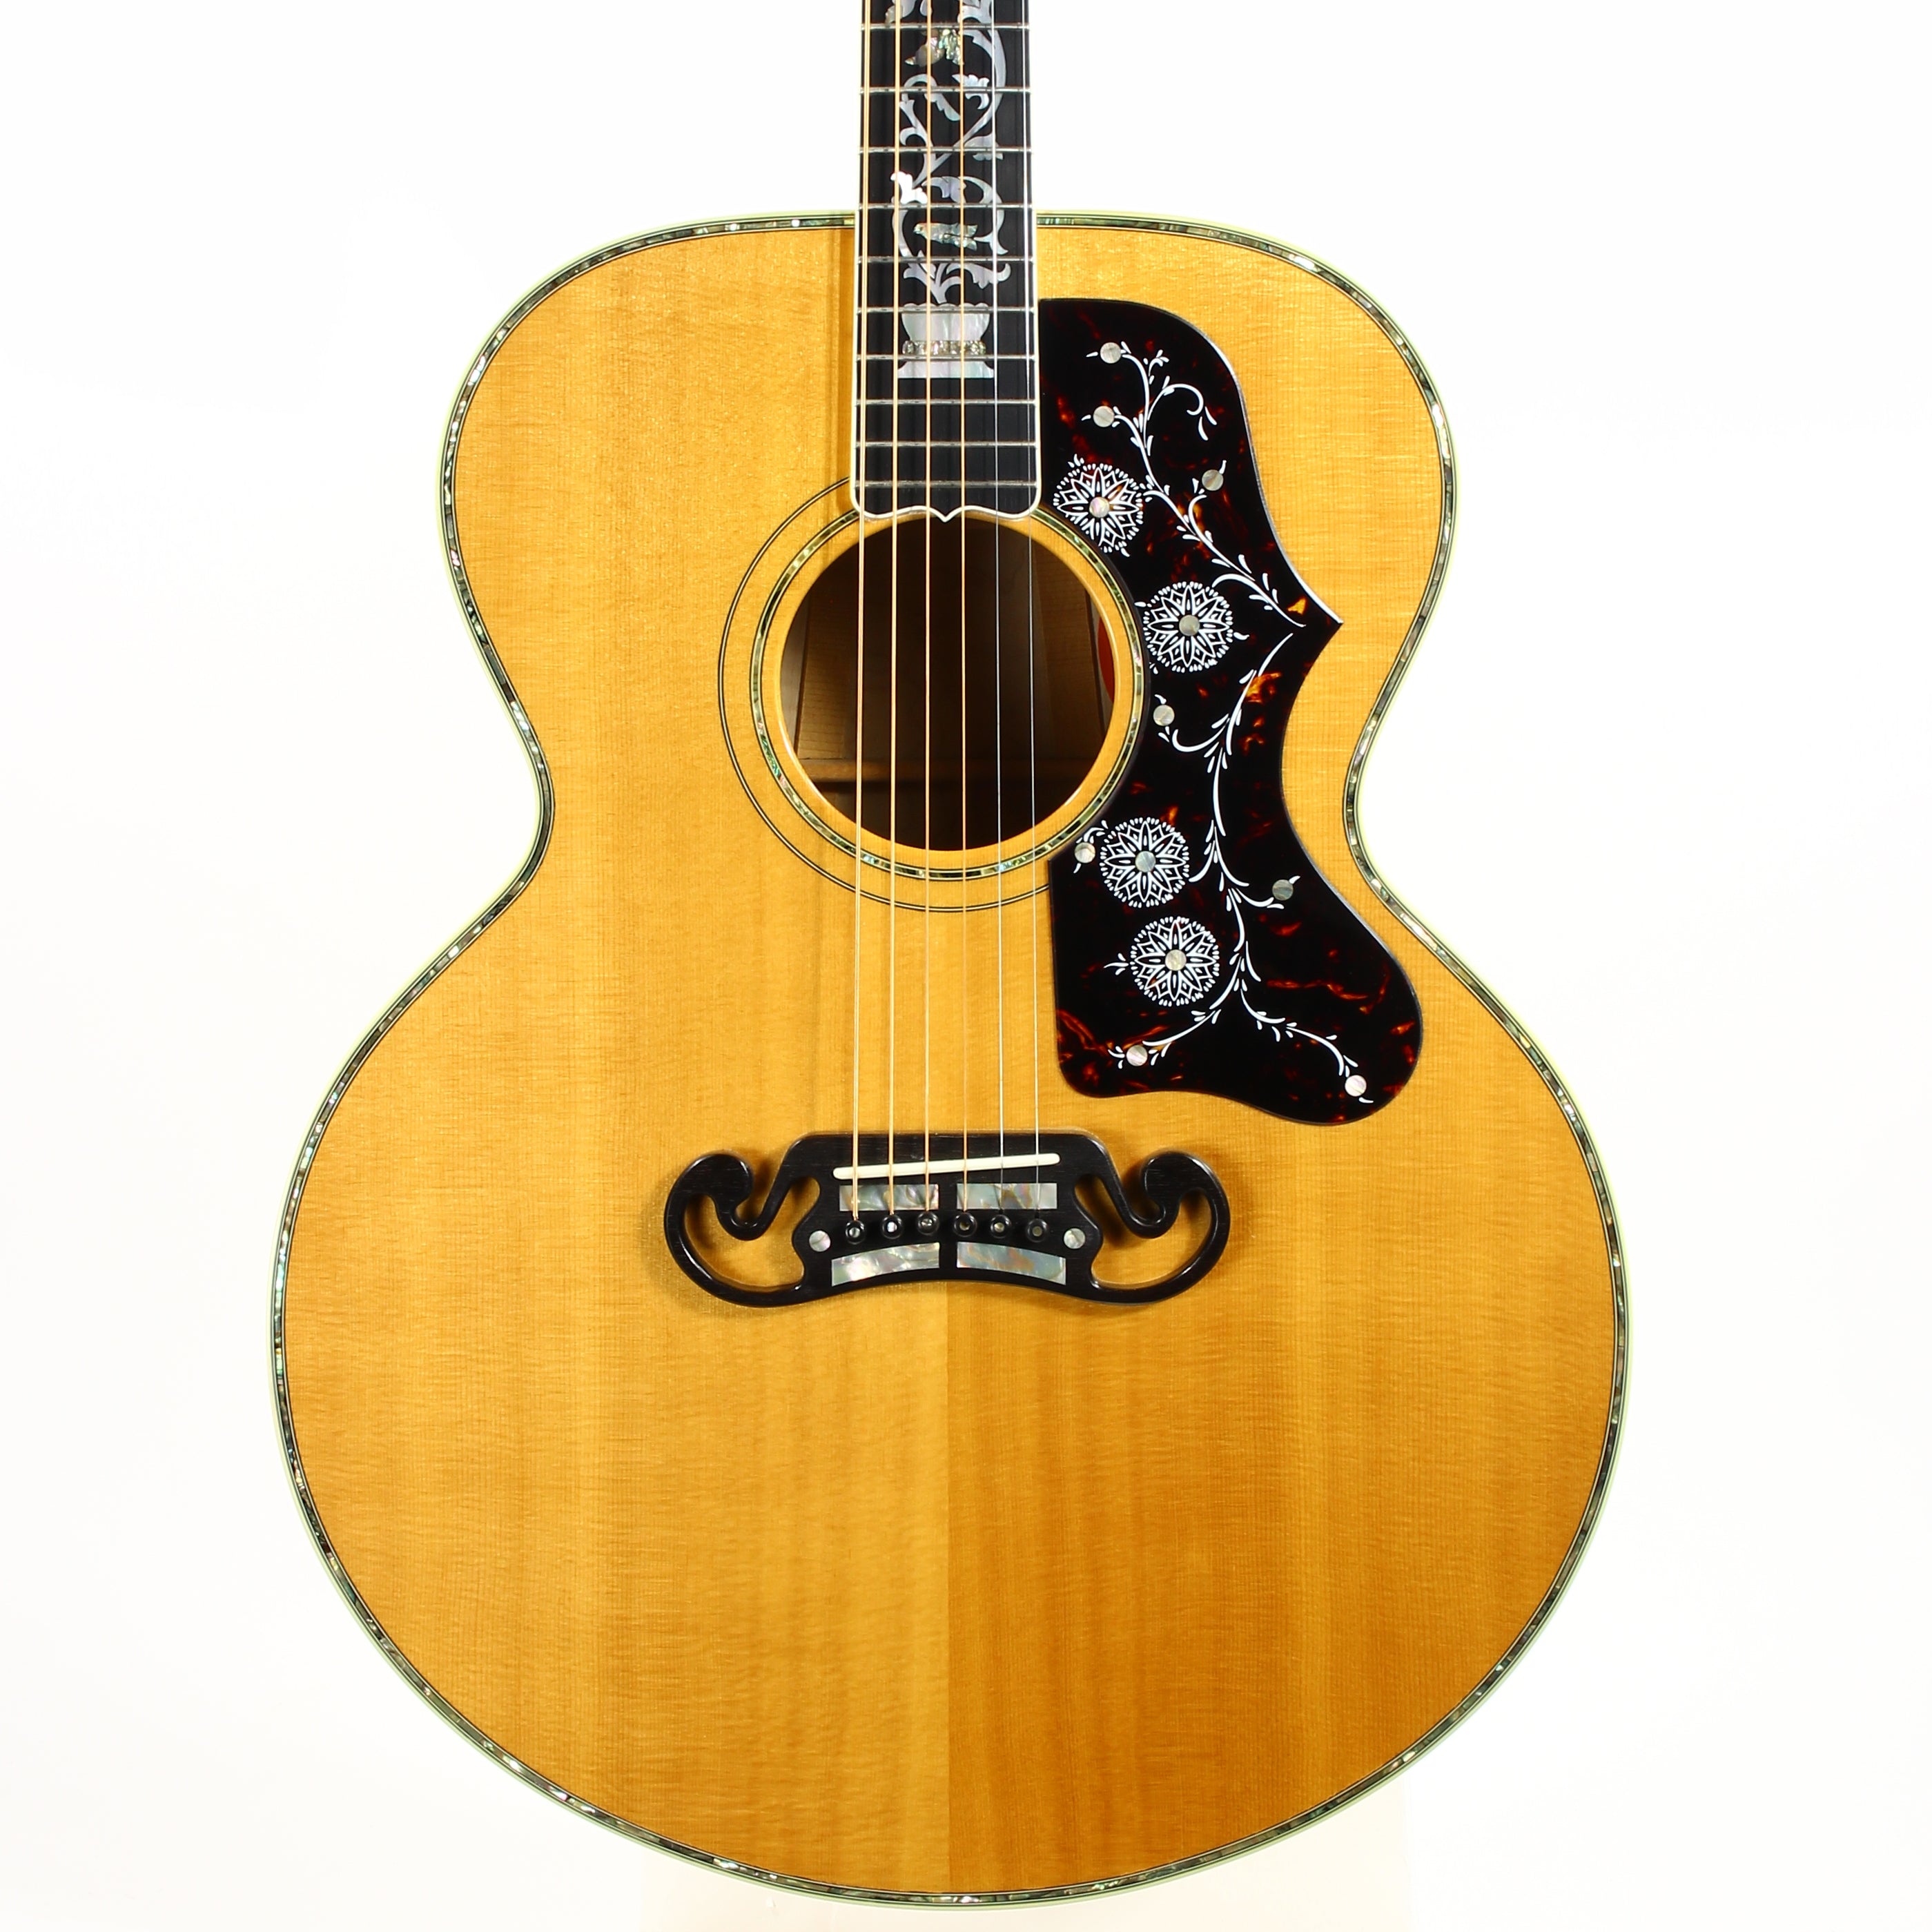 *SOLD*  RARE 1995 Gibson Montana J-200 DELUXE VINE INLAY One-Off -- 3-Piece Back, Abalone/MOP Inlays, SJ-200 j200 sj200